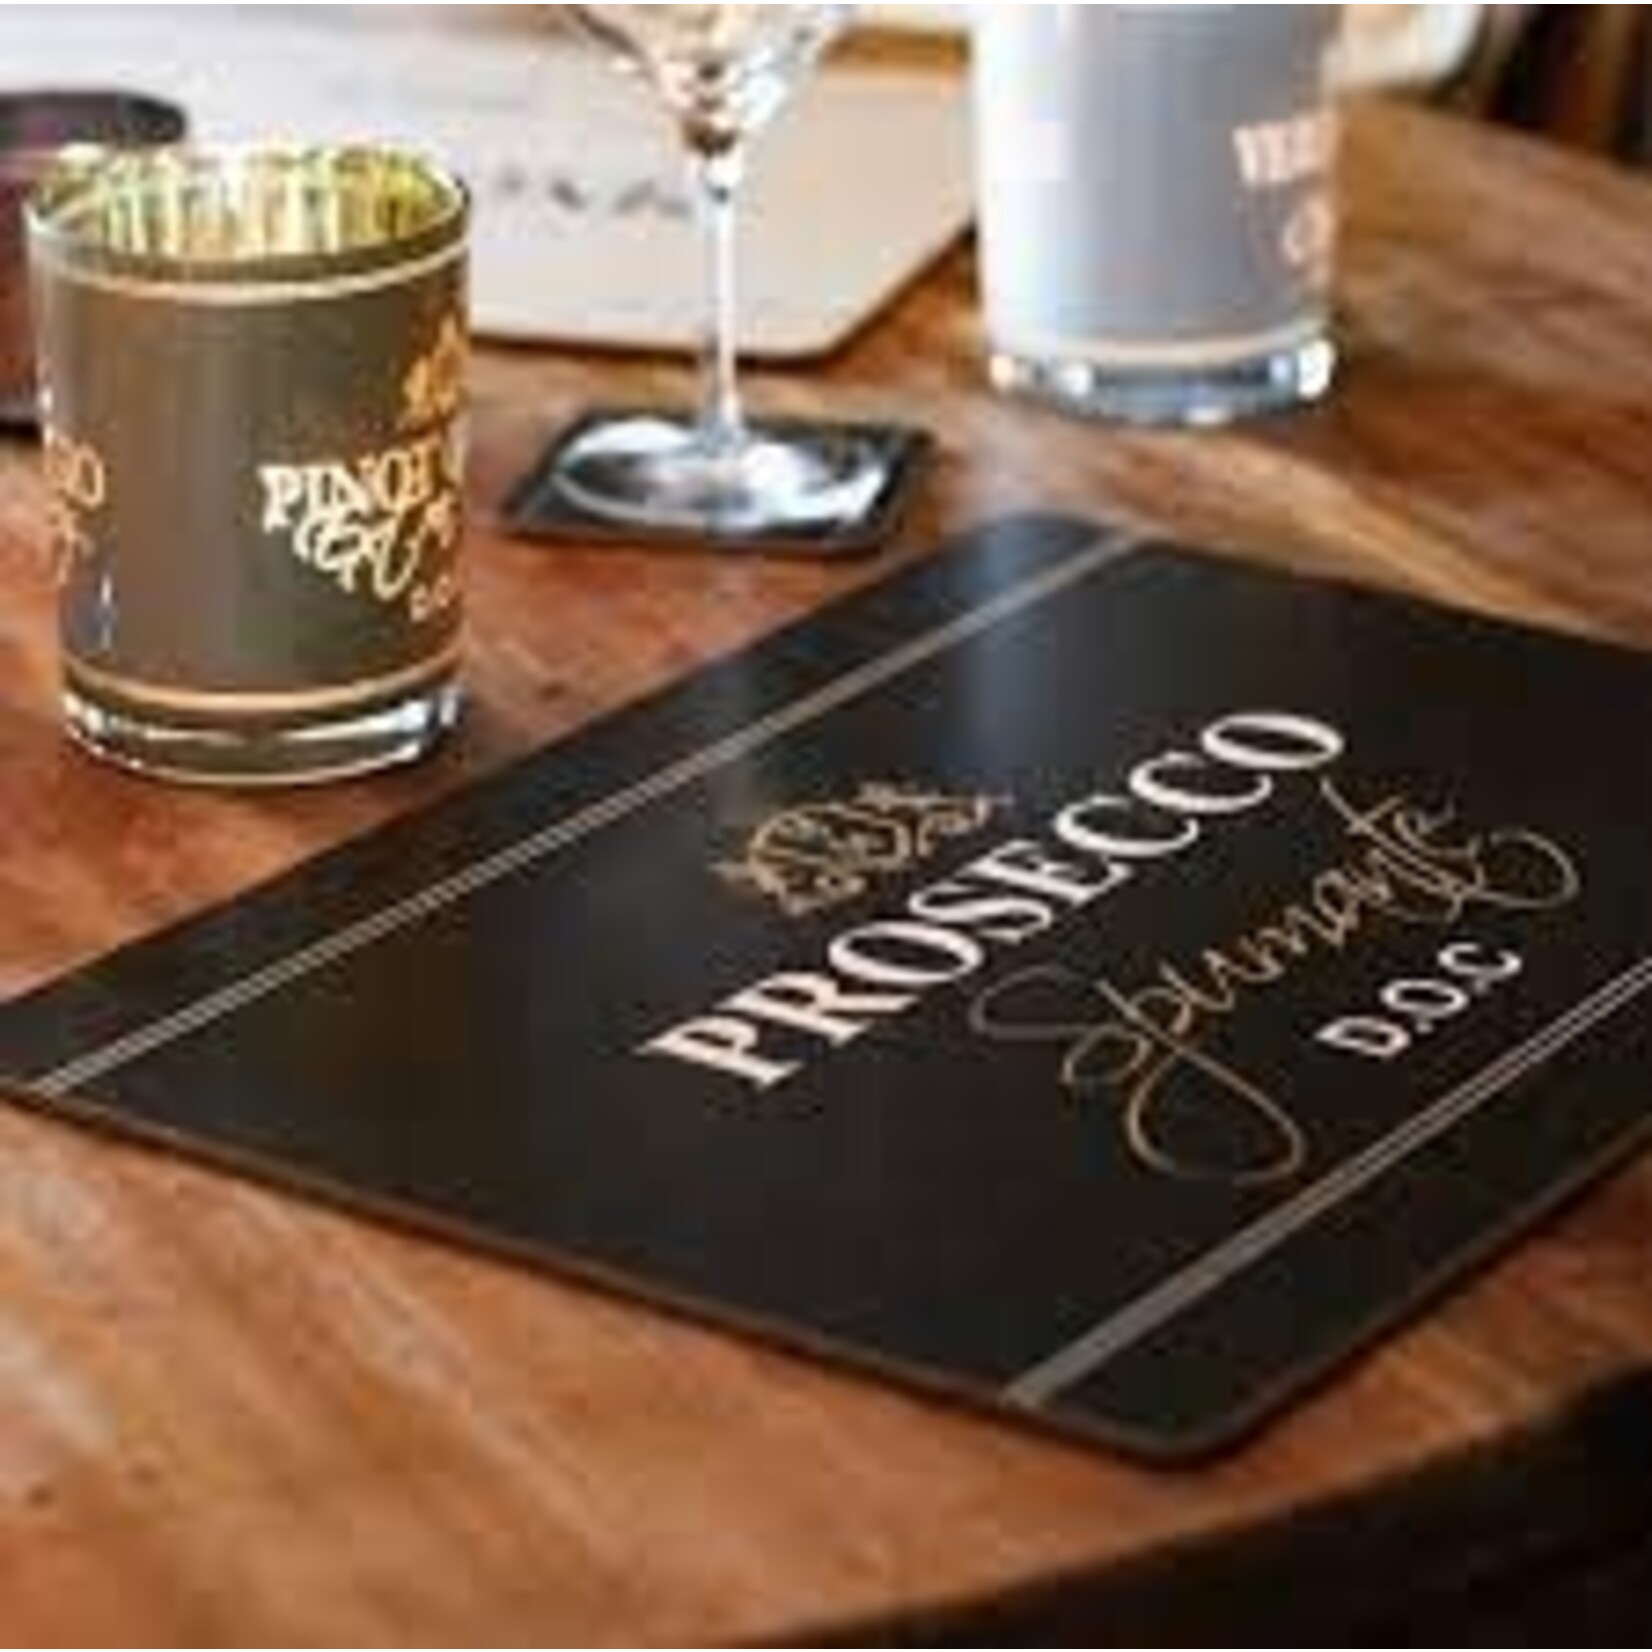 Mars & More Placemats wijn Prosecco set-4 placemats kurk onderlaag Prosecco Mars & More SCPMWPZ